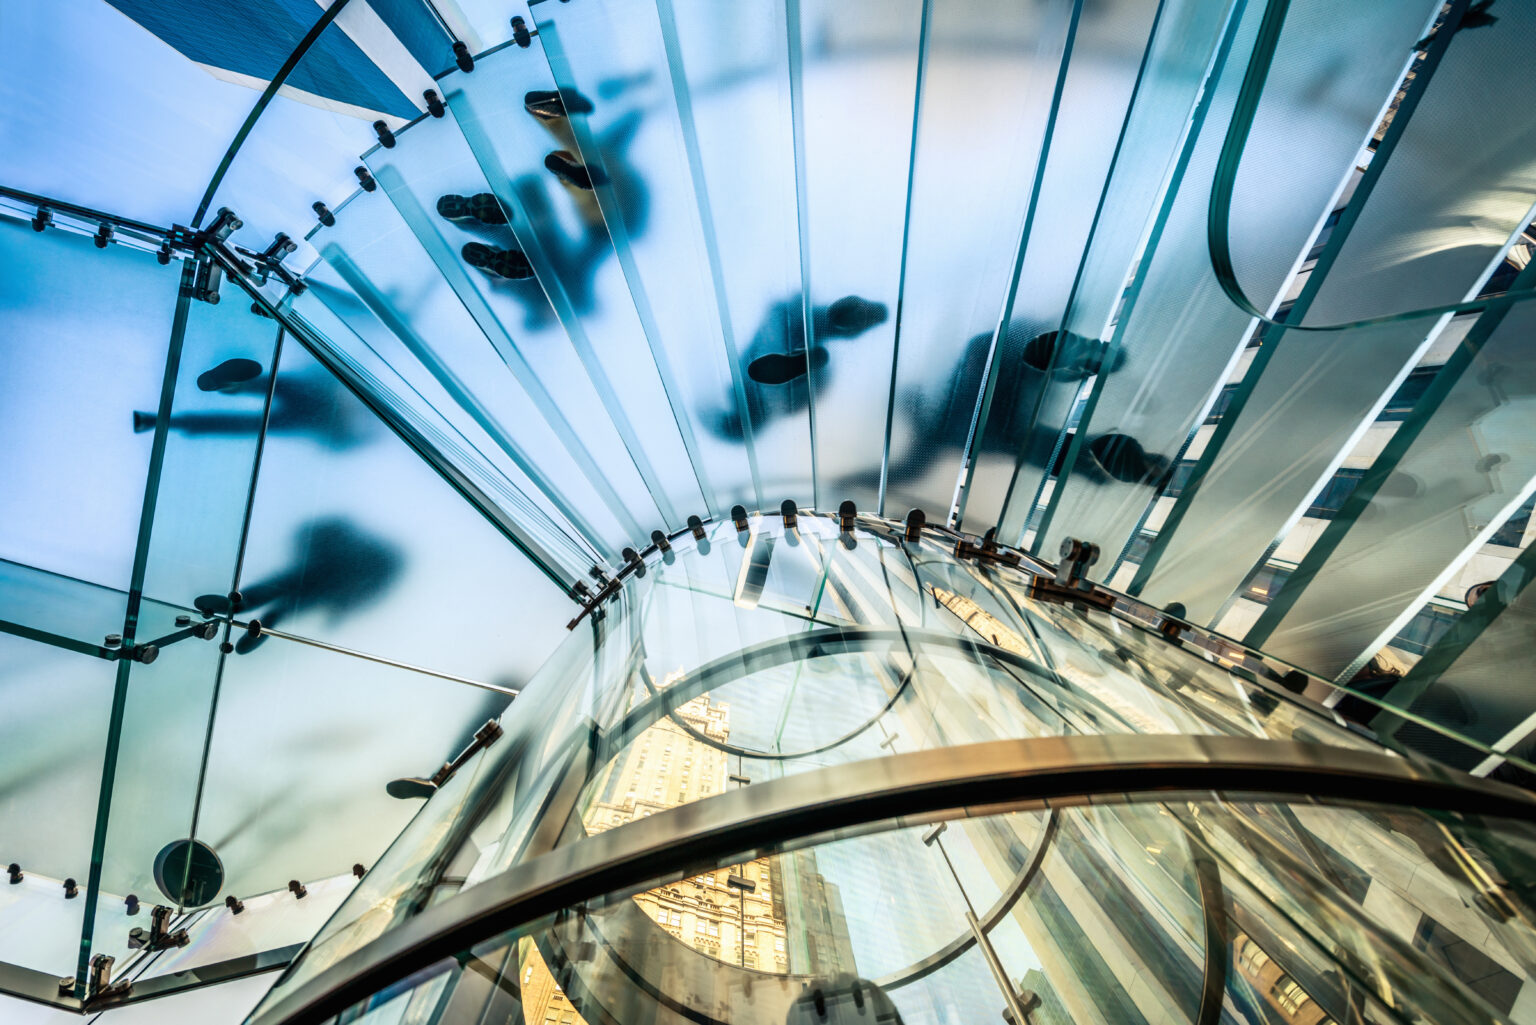 Upward view of a glass staircase with business people ascending.